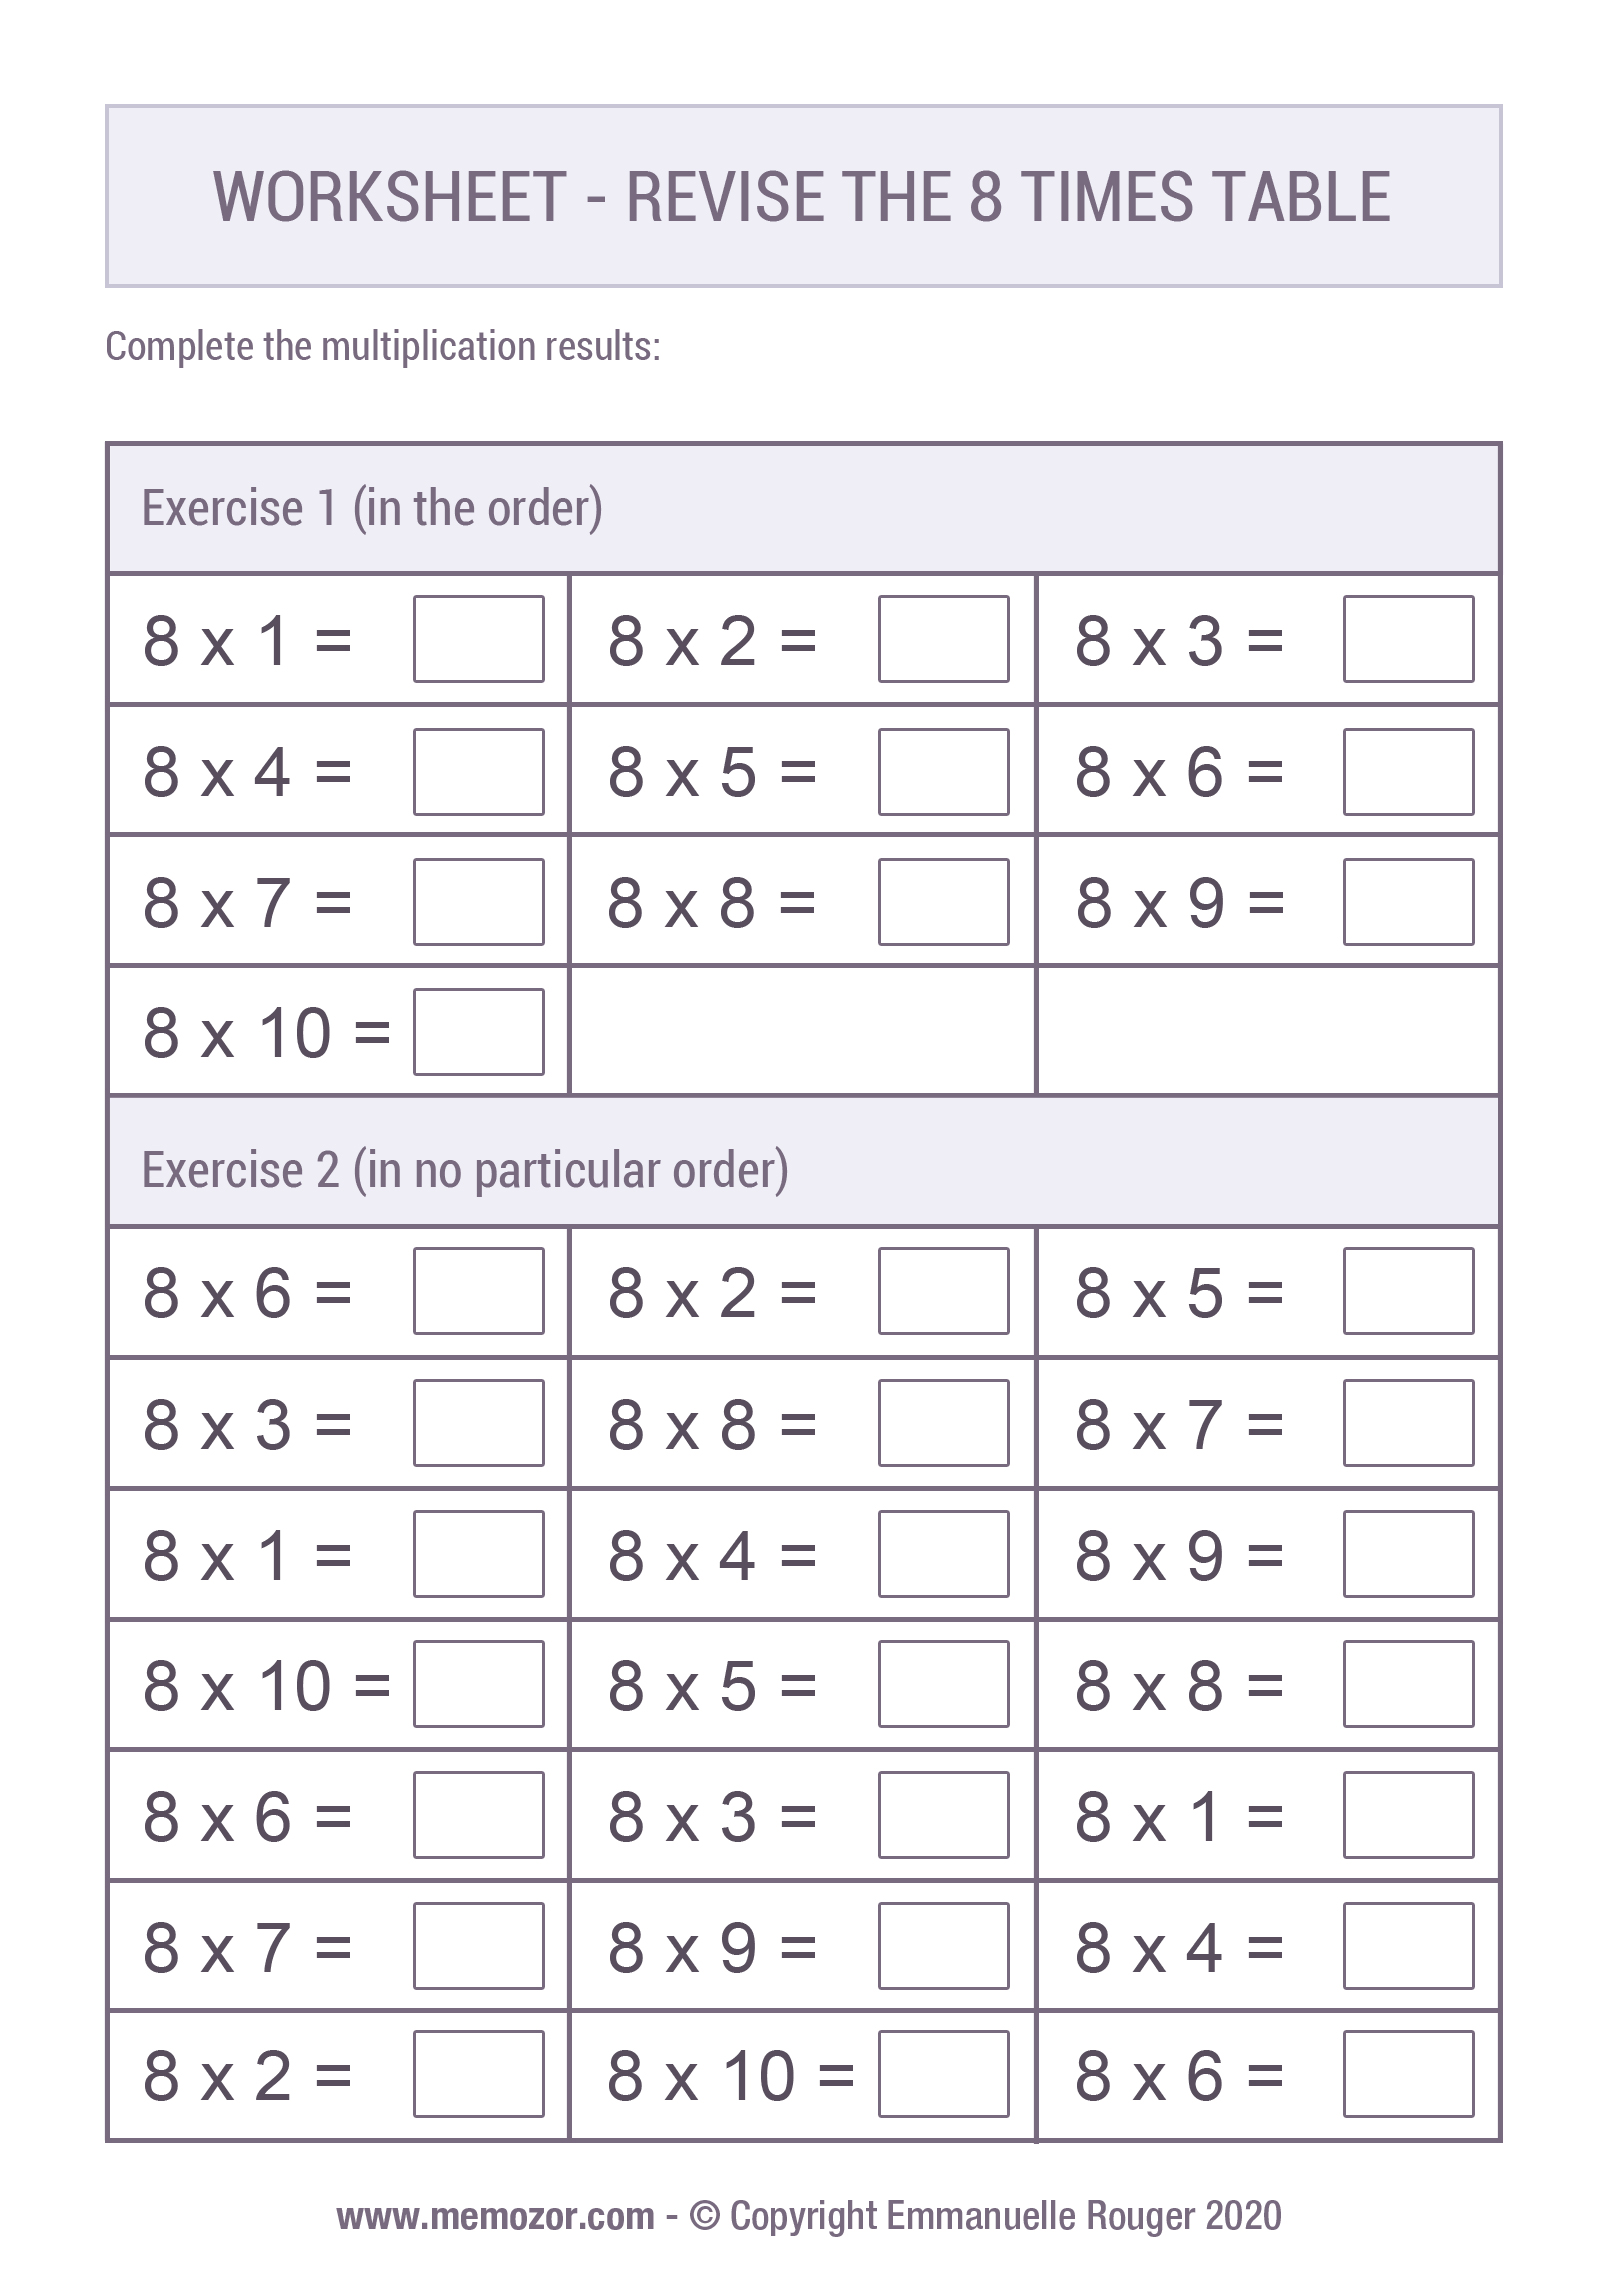  Worksheet To Print Revise The 8 times Table Memozor